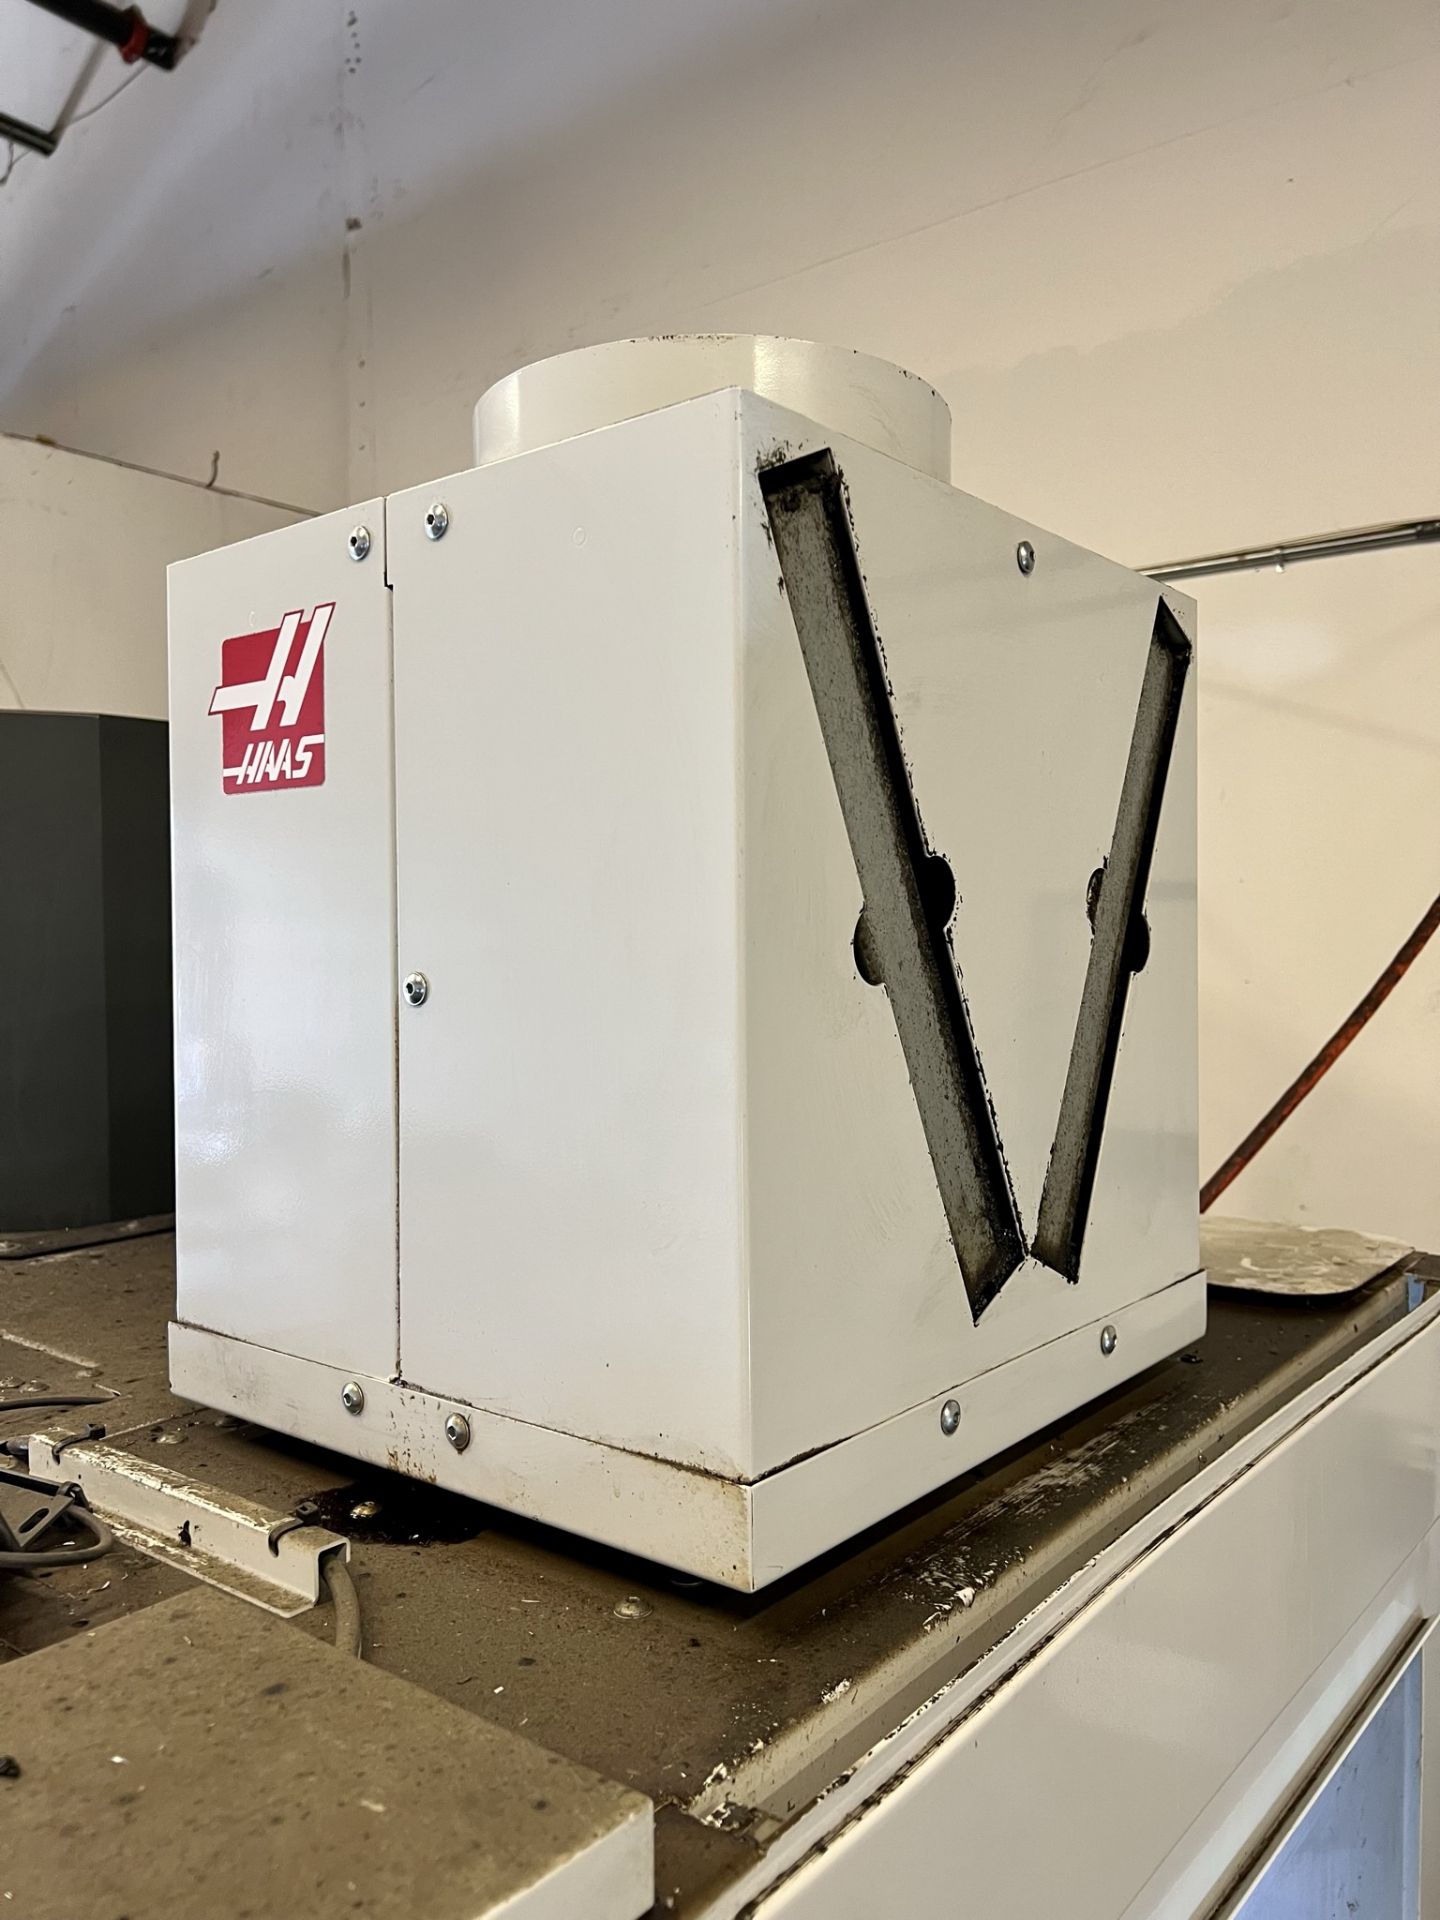 2015 HAAS VF-2 VERTICAL MACHINING CENTER, XYZ TRAVELS: 30" X 16" X 20", 36" X 14" TABLE, PROBING - Image 19 of 24